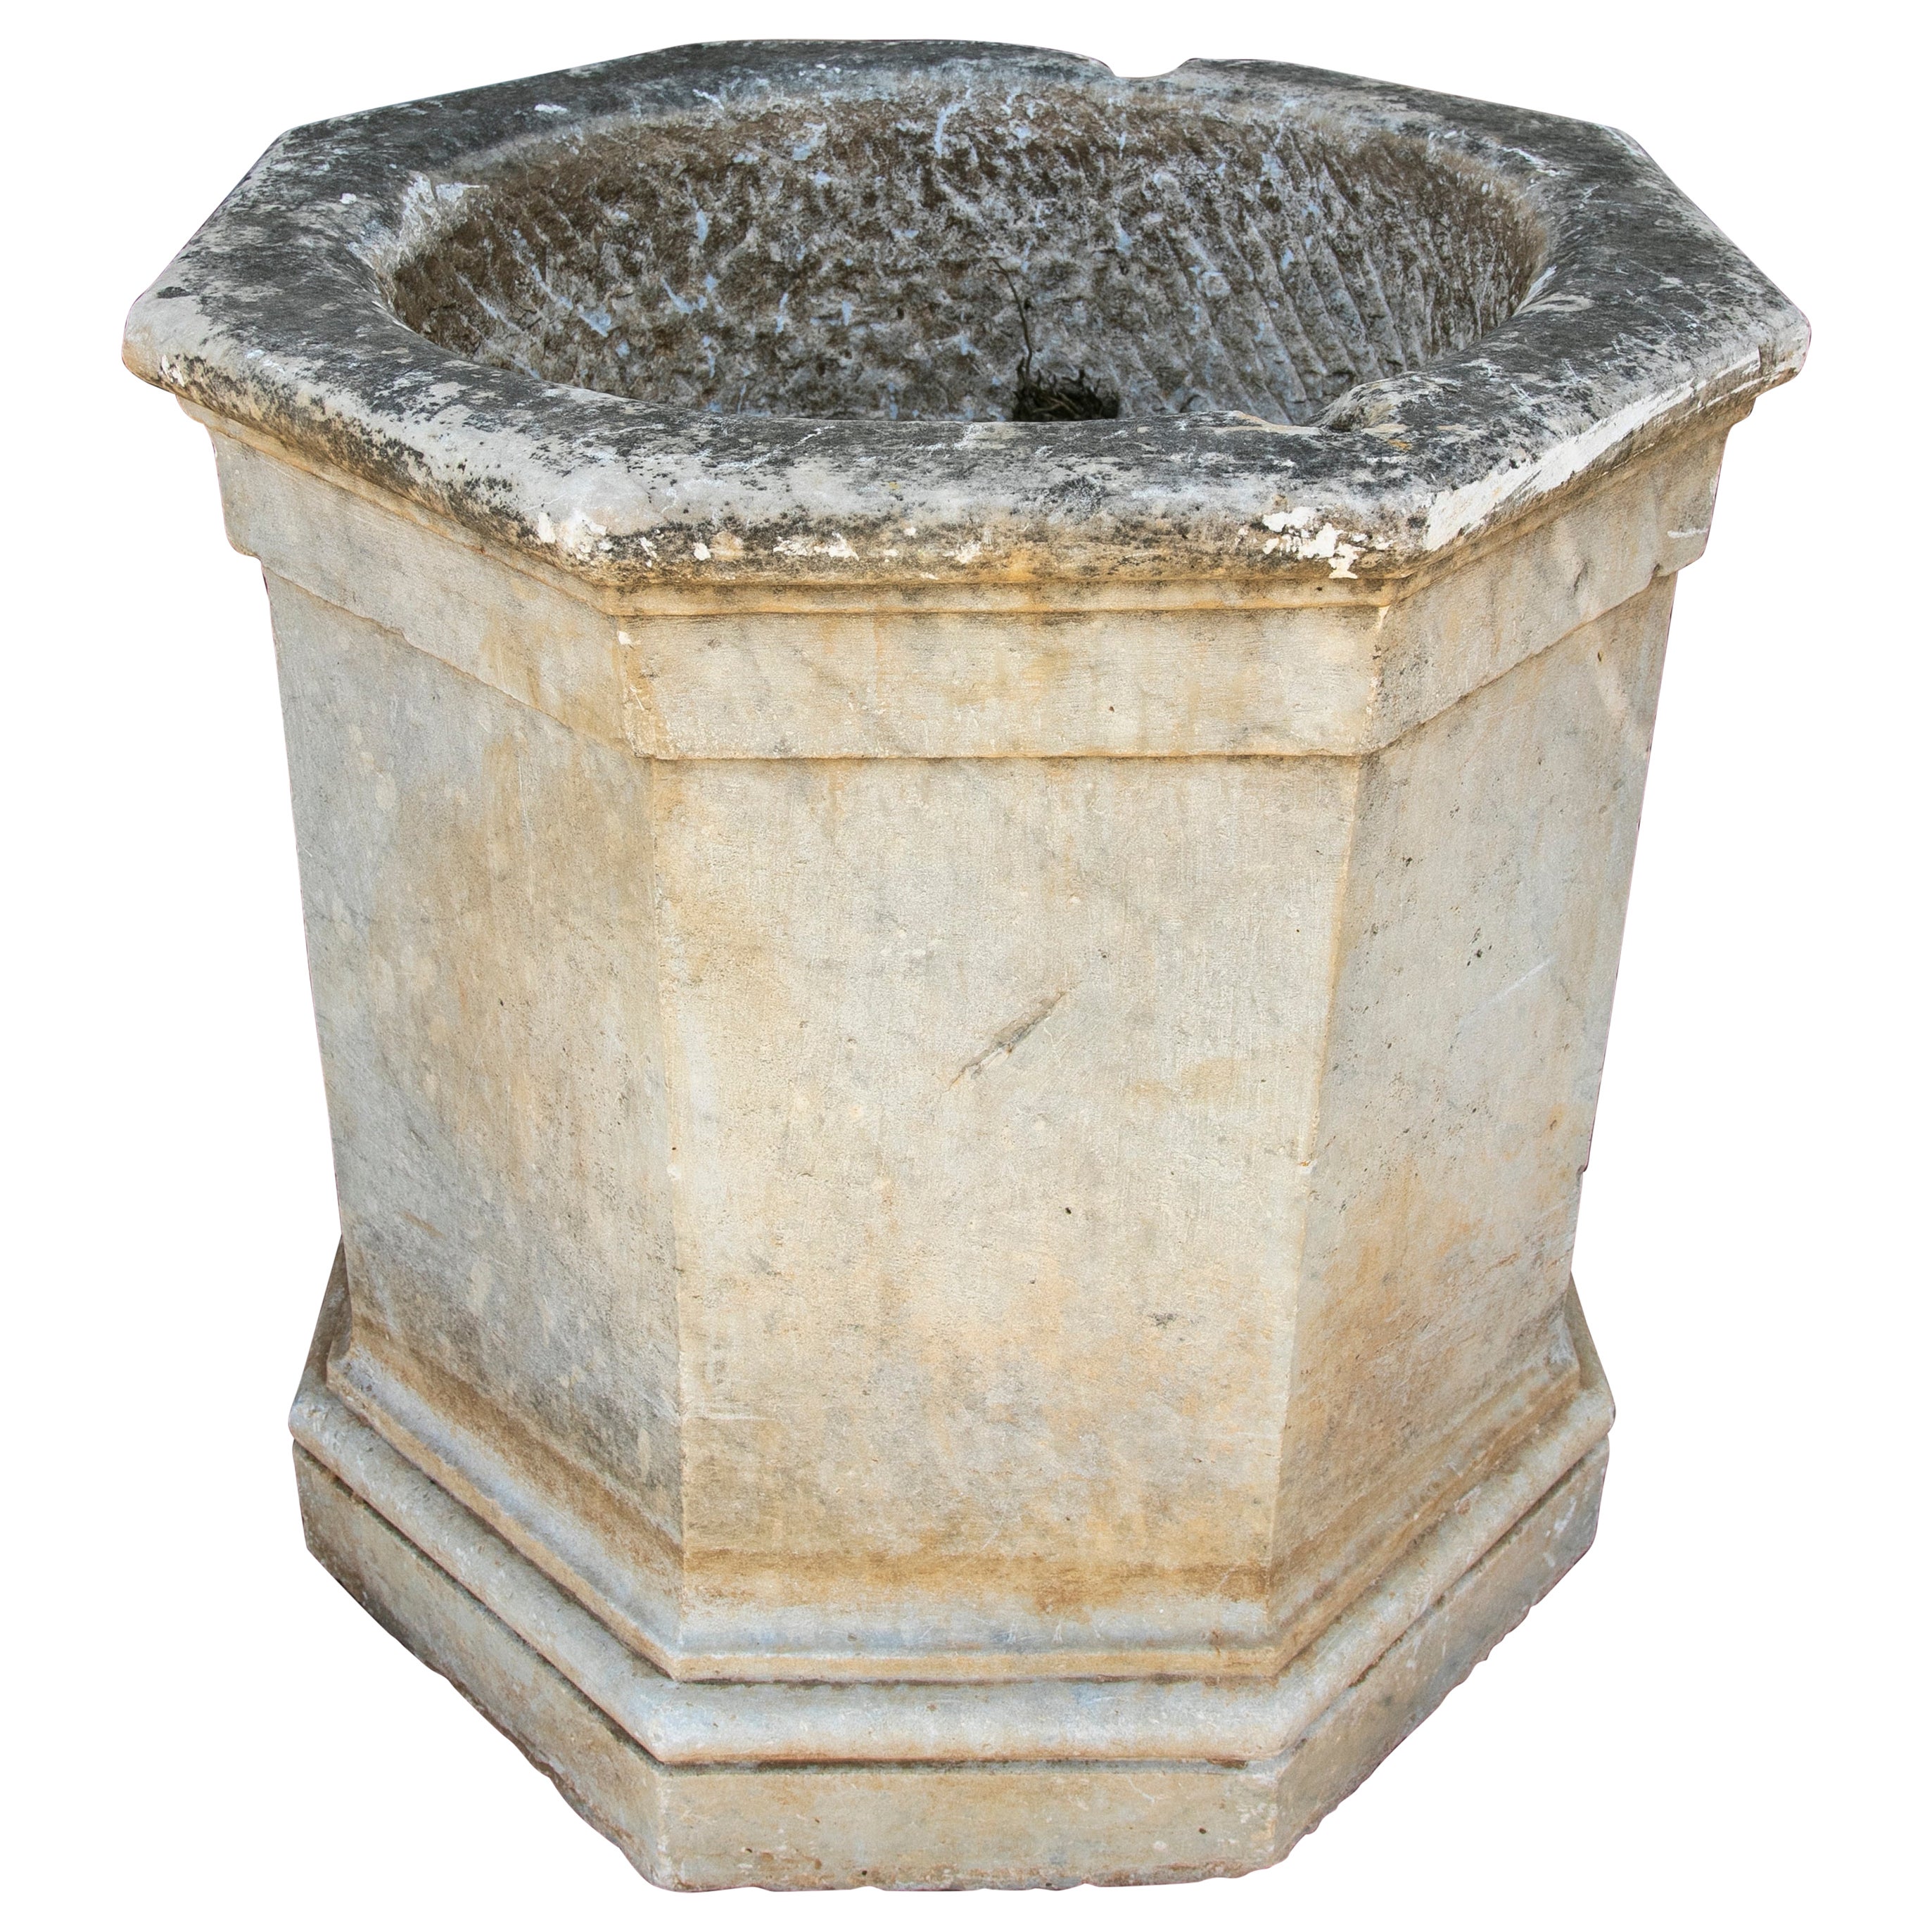 18th Century Spainish Hand-Carved Marble Well Spout